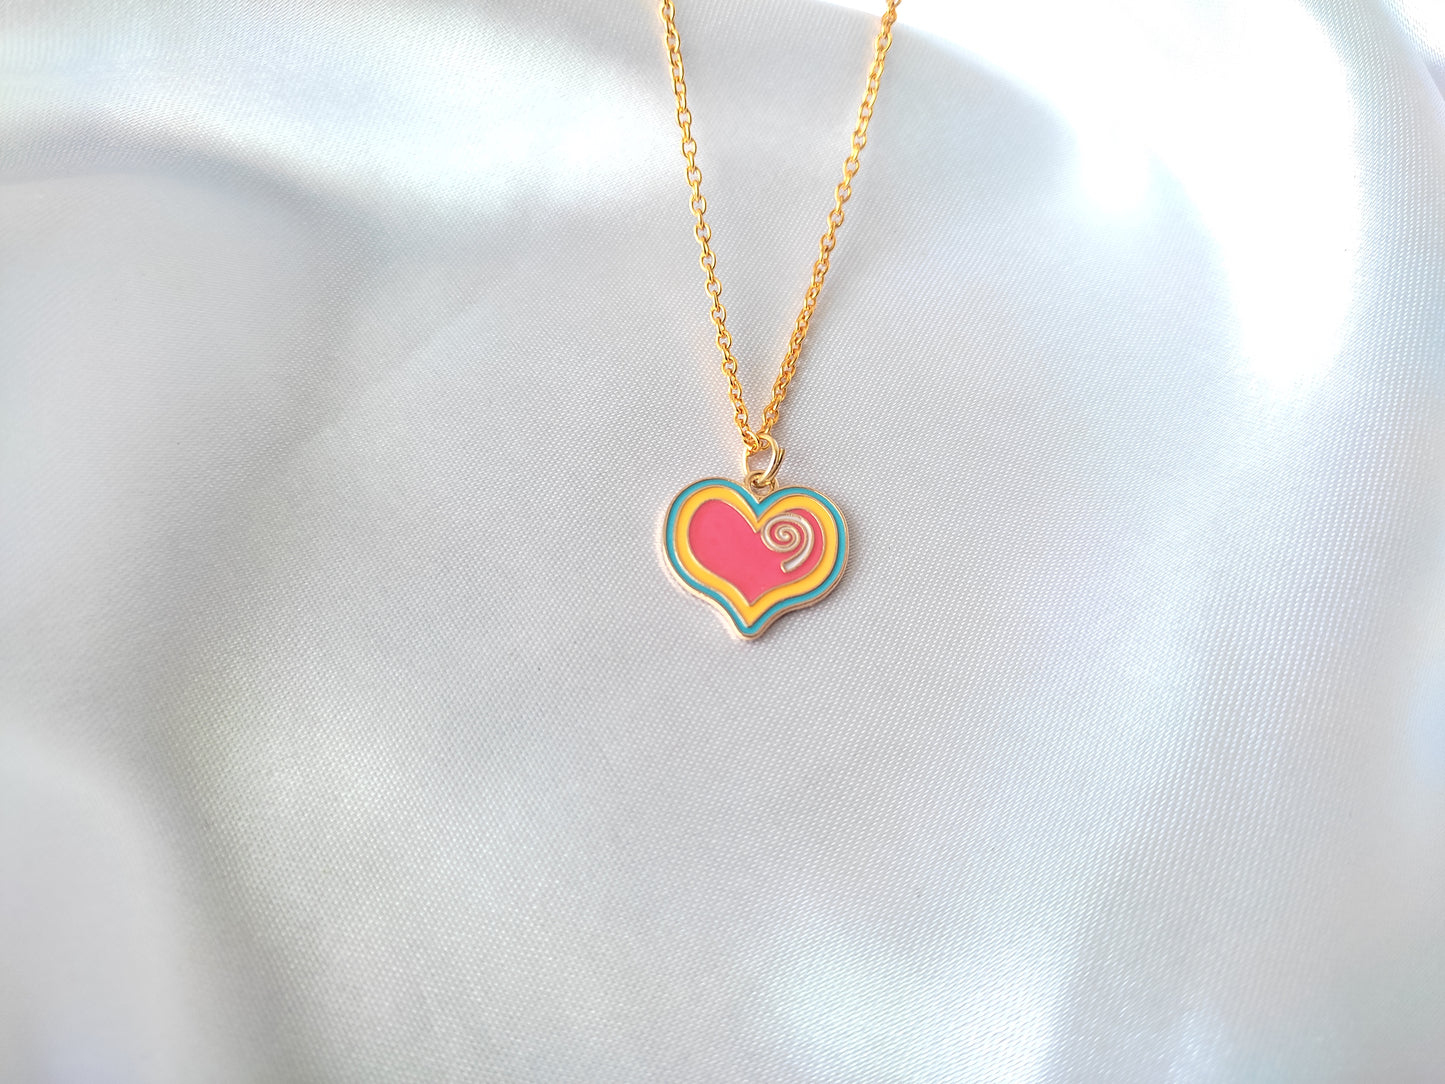 Cute heart pendant necklace for women and girls